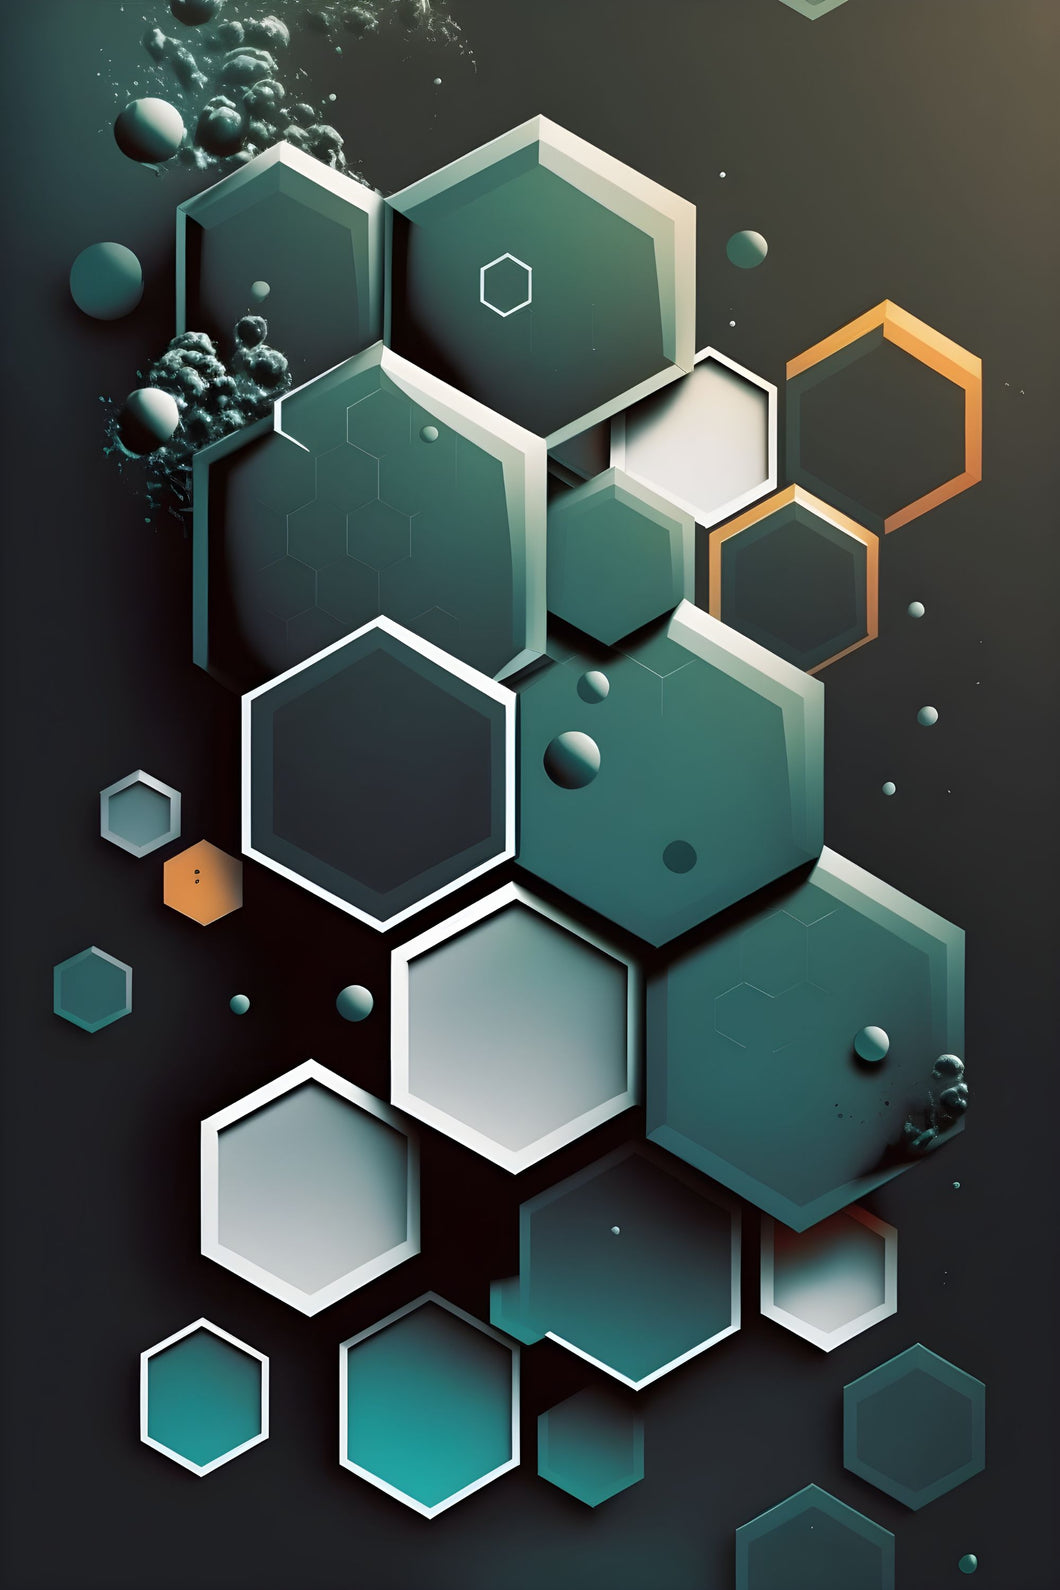 Honeycomb1 - Abstract Art Poster